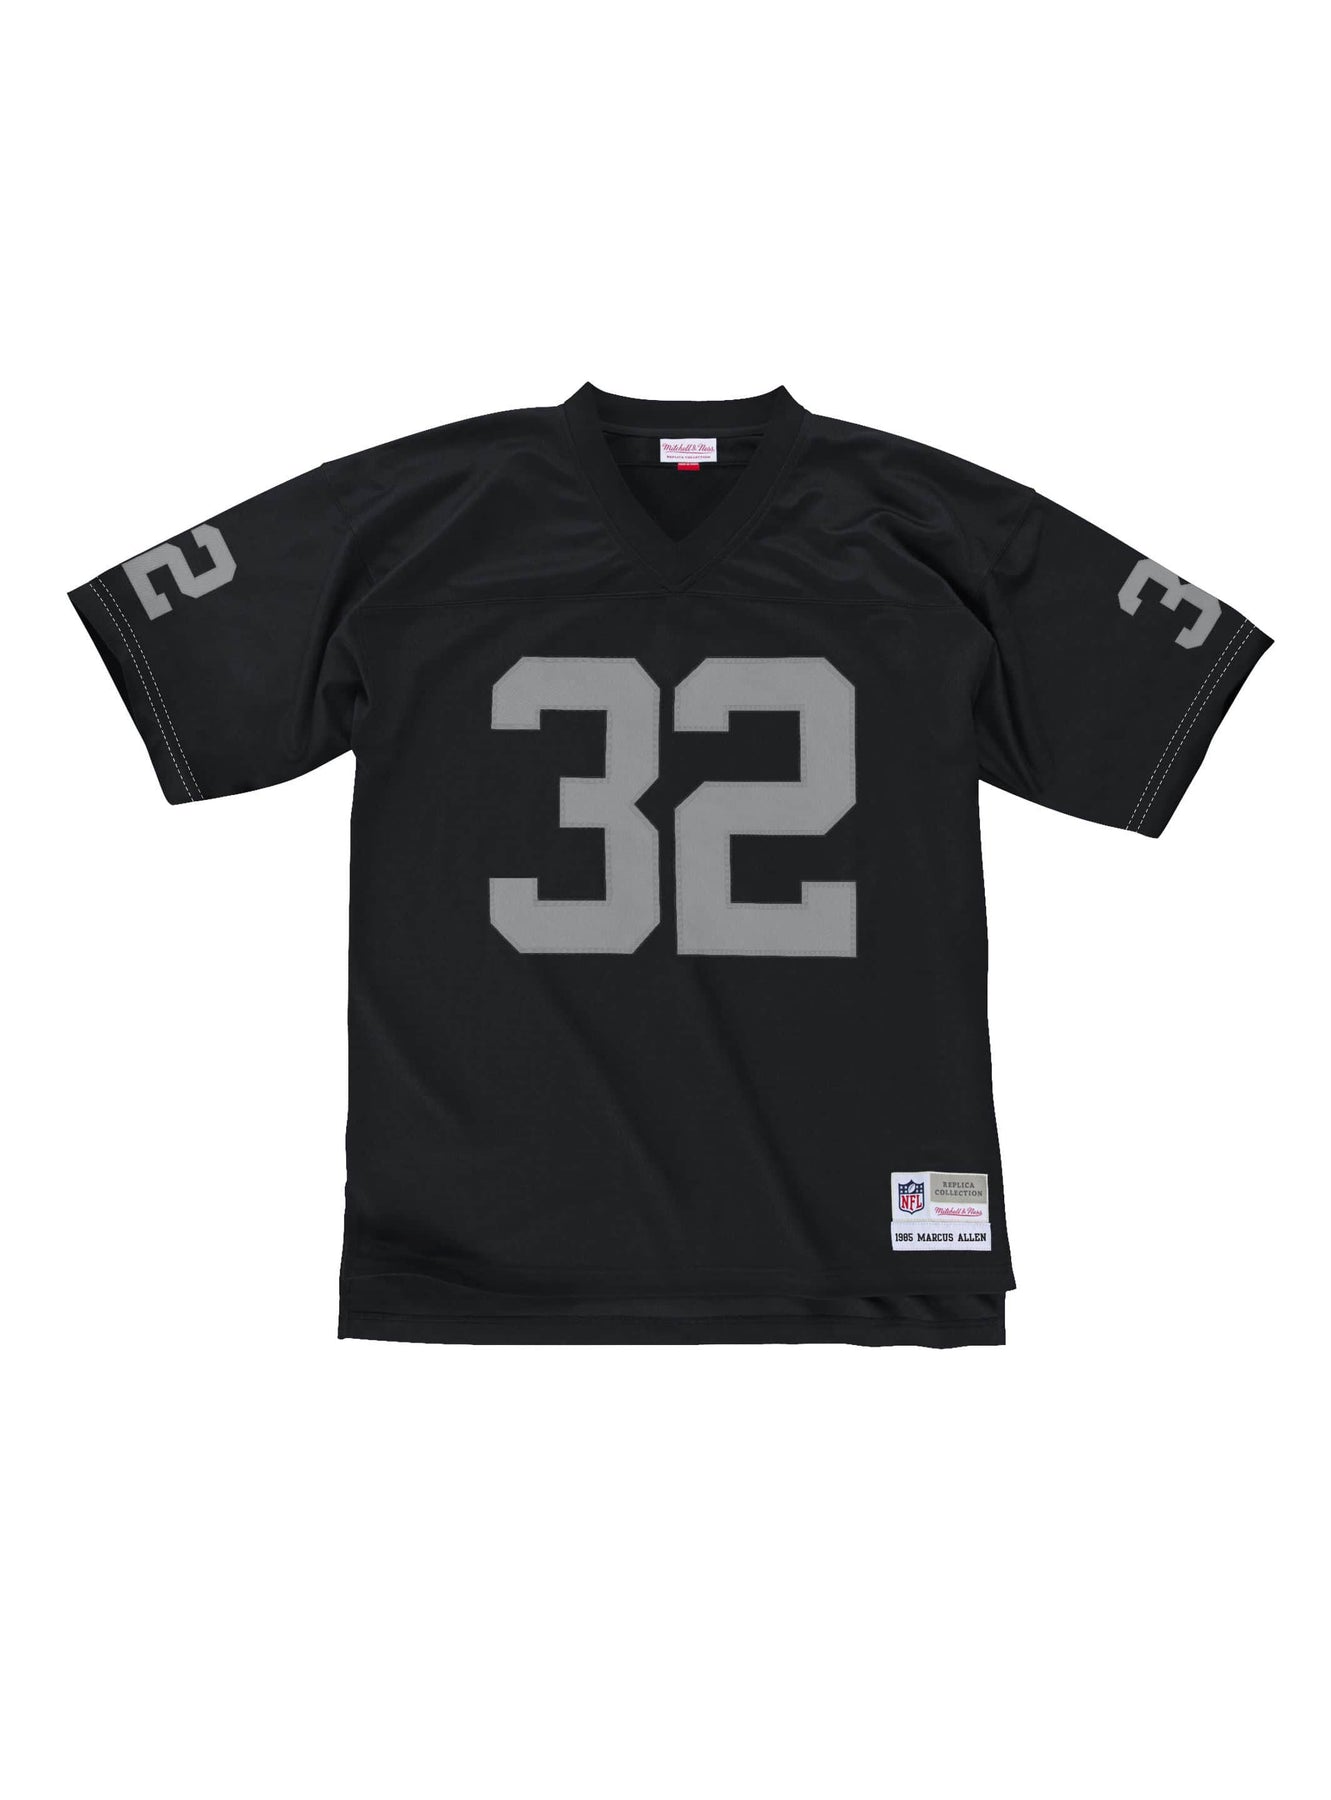 los angeles raiders mitchell and ness